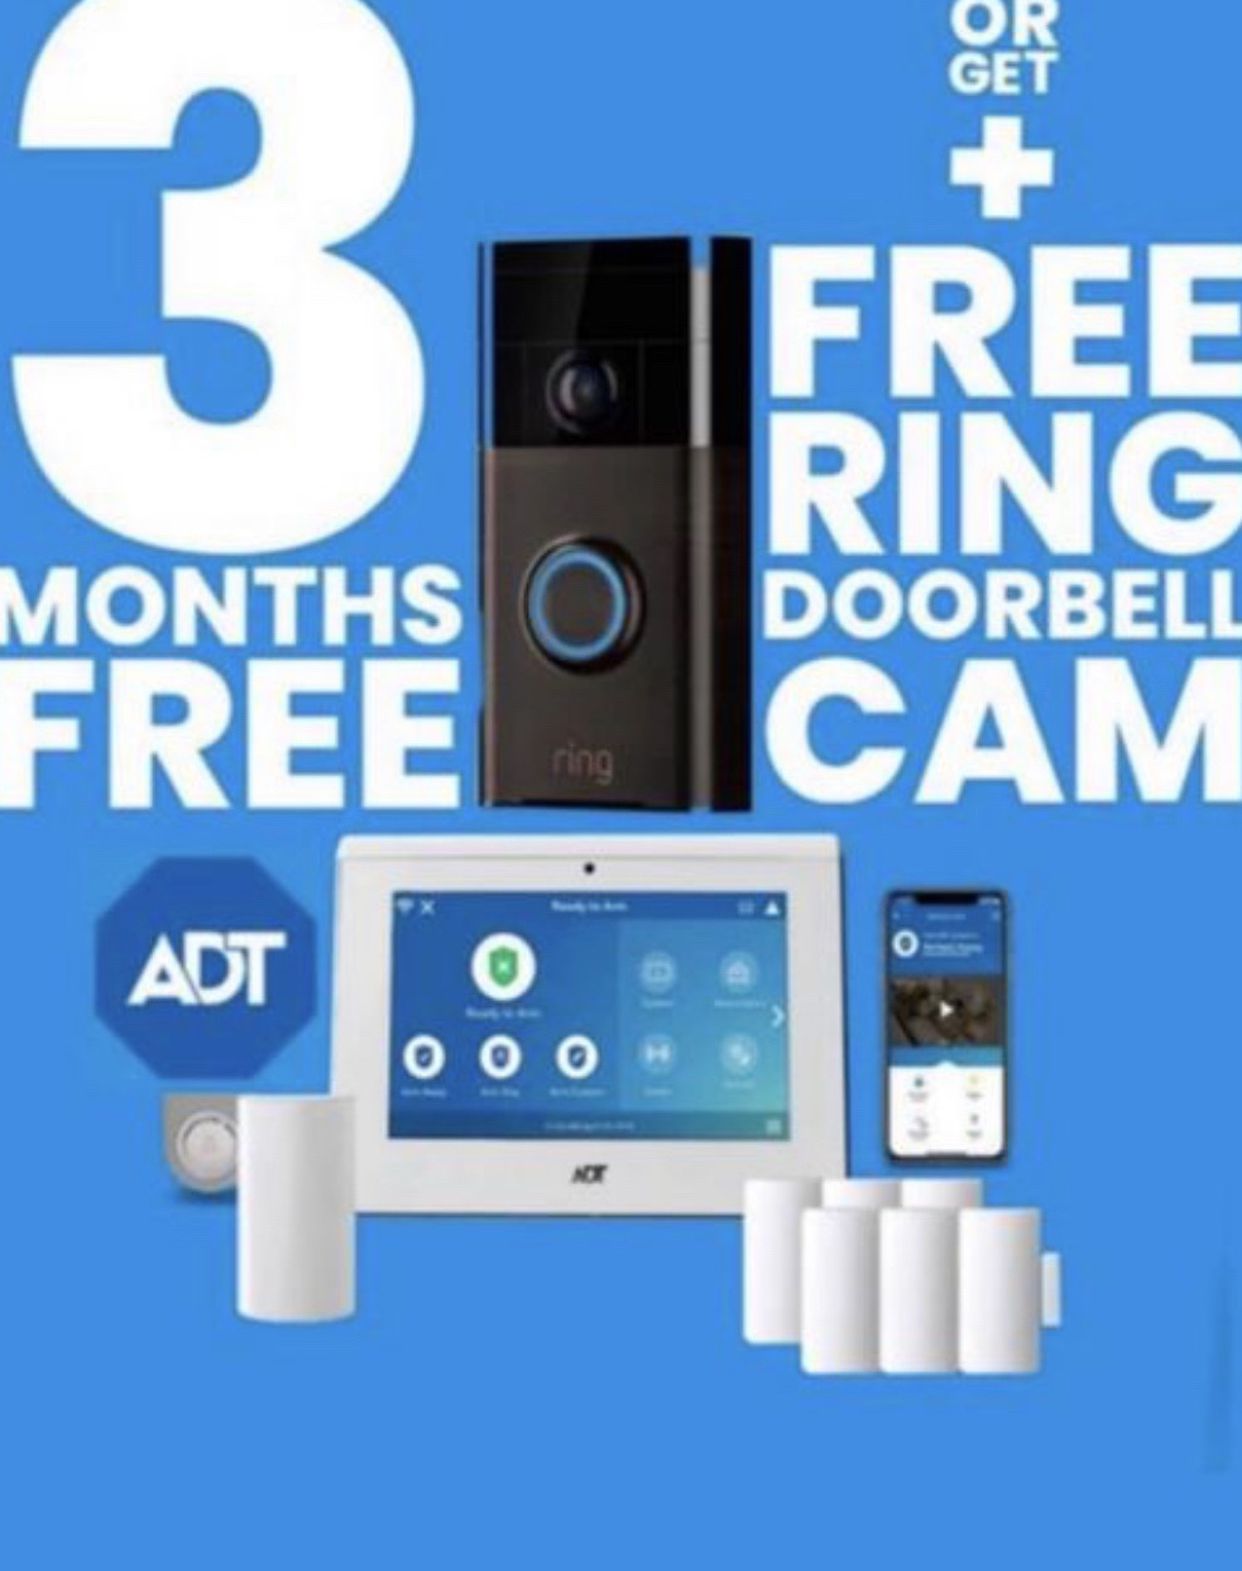 ADT SECURITY MONITORING FIRE AND MEDICAL BEATS VIVINT AND BRINKS RING DOORBELL